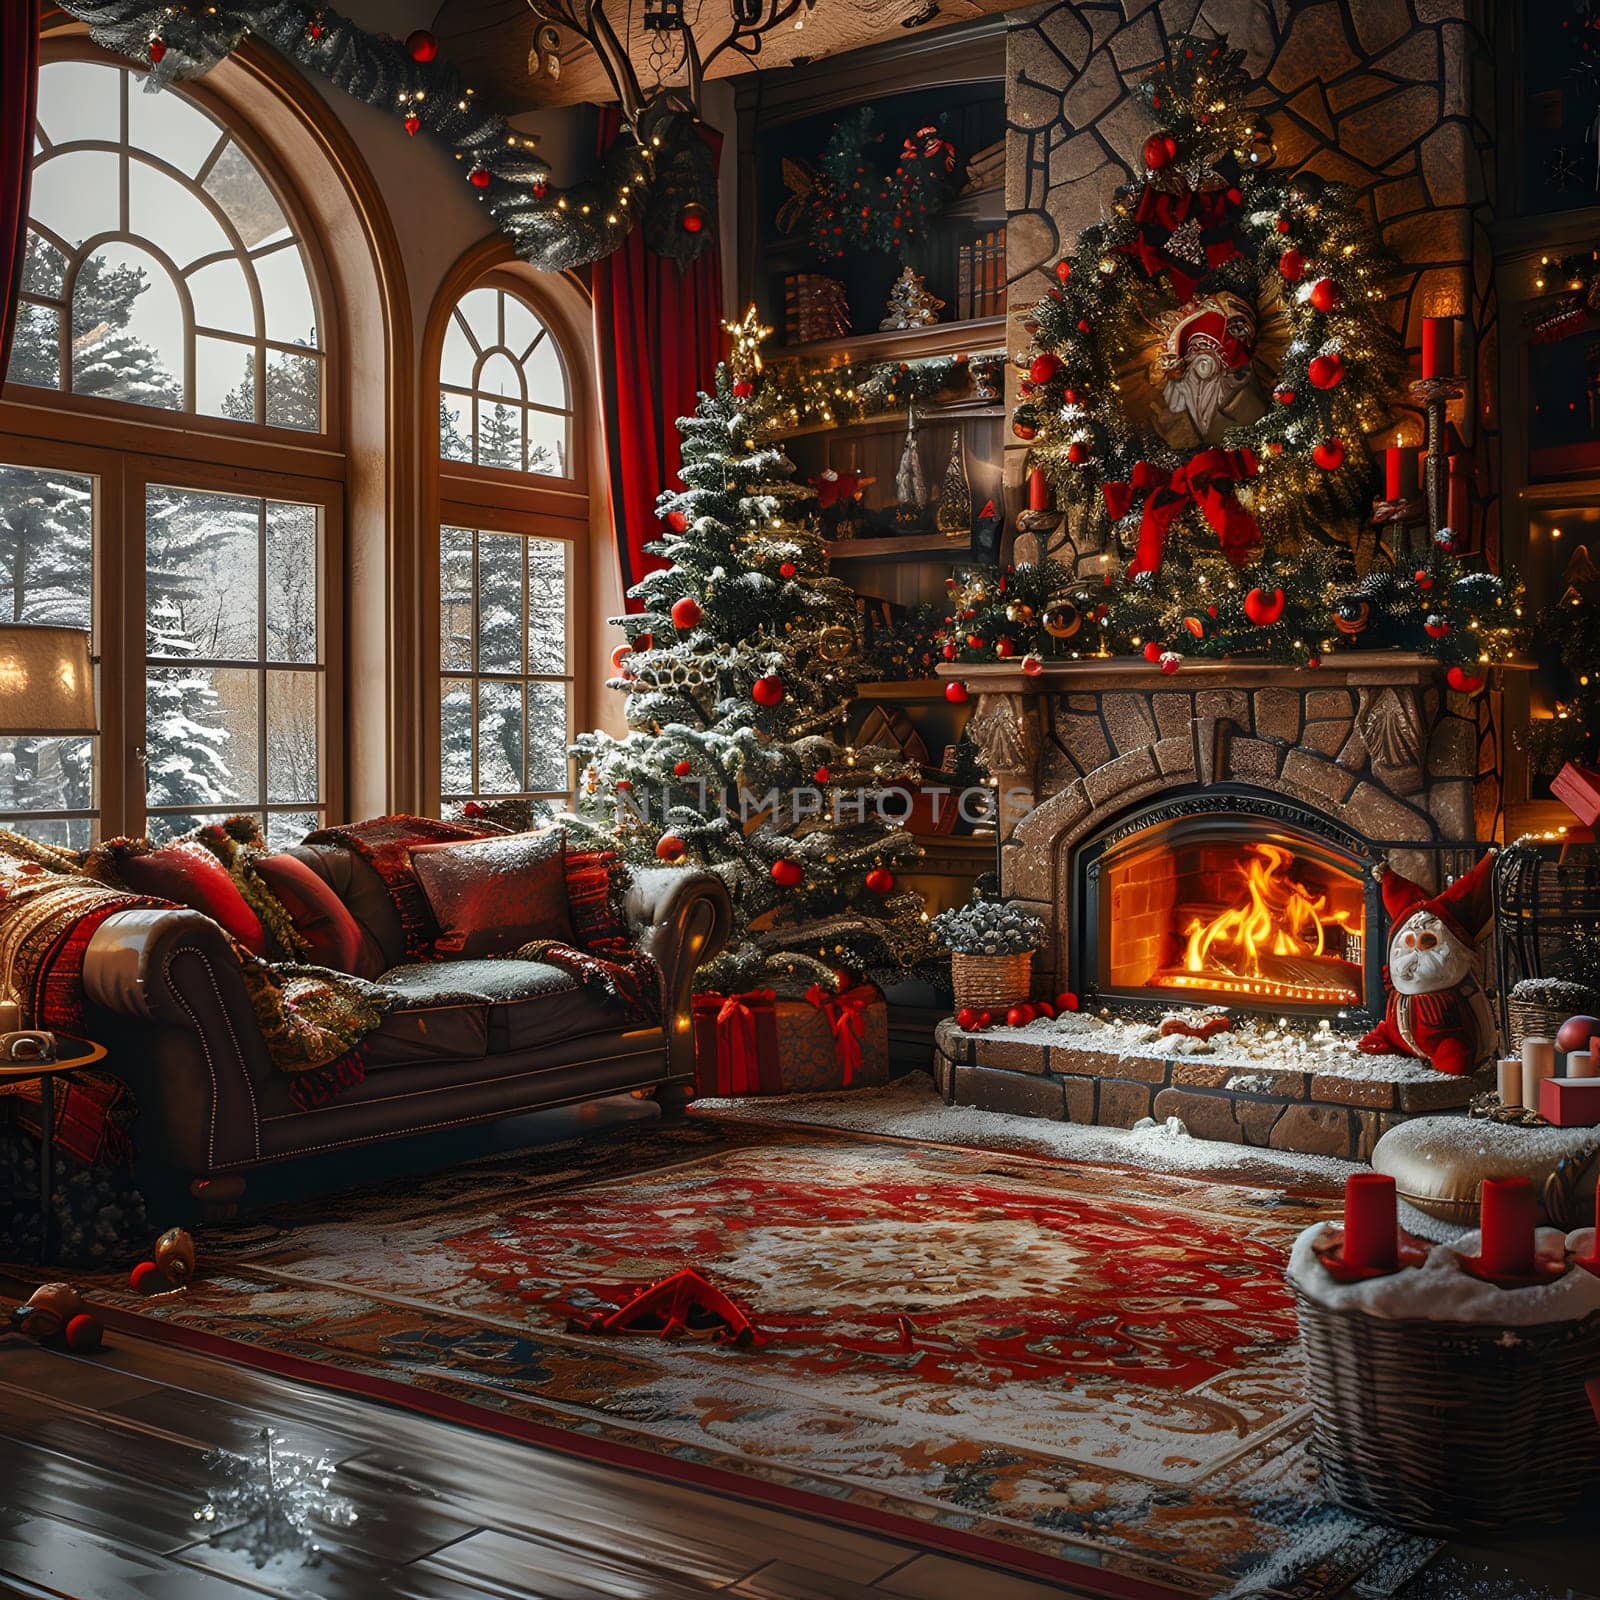 A festive living room with a Christmas tree, couch, and fireplace, adorned with holiday decorations and ornaments. The cozy interior design brings the Christmas spirit to life